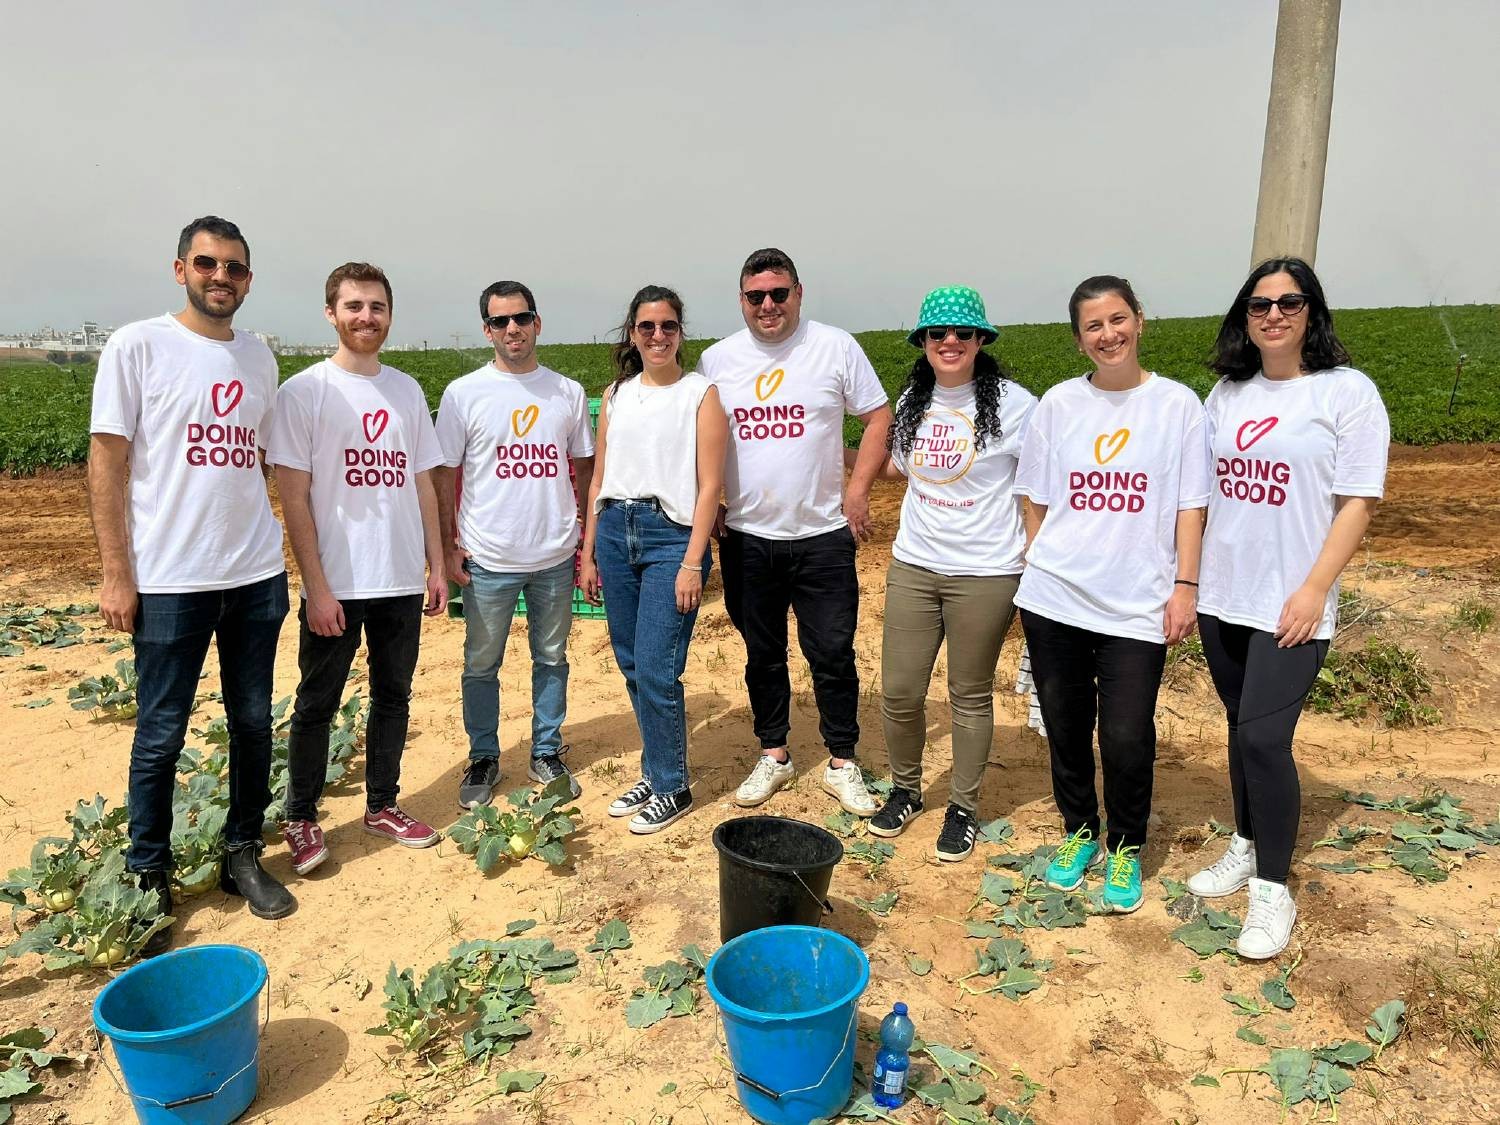 Team members from our Israel office at a harvest on our Good Deeds Day 